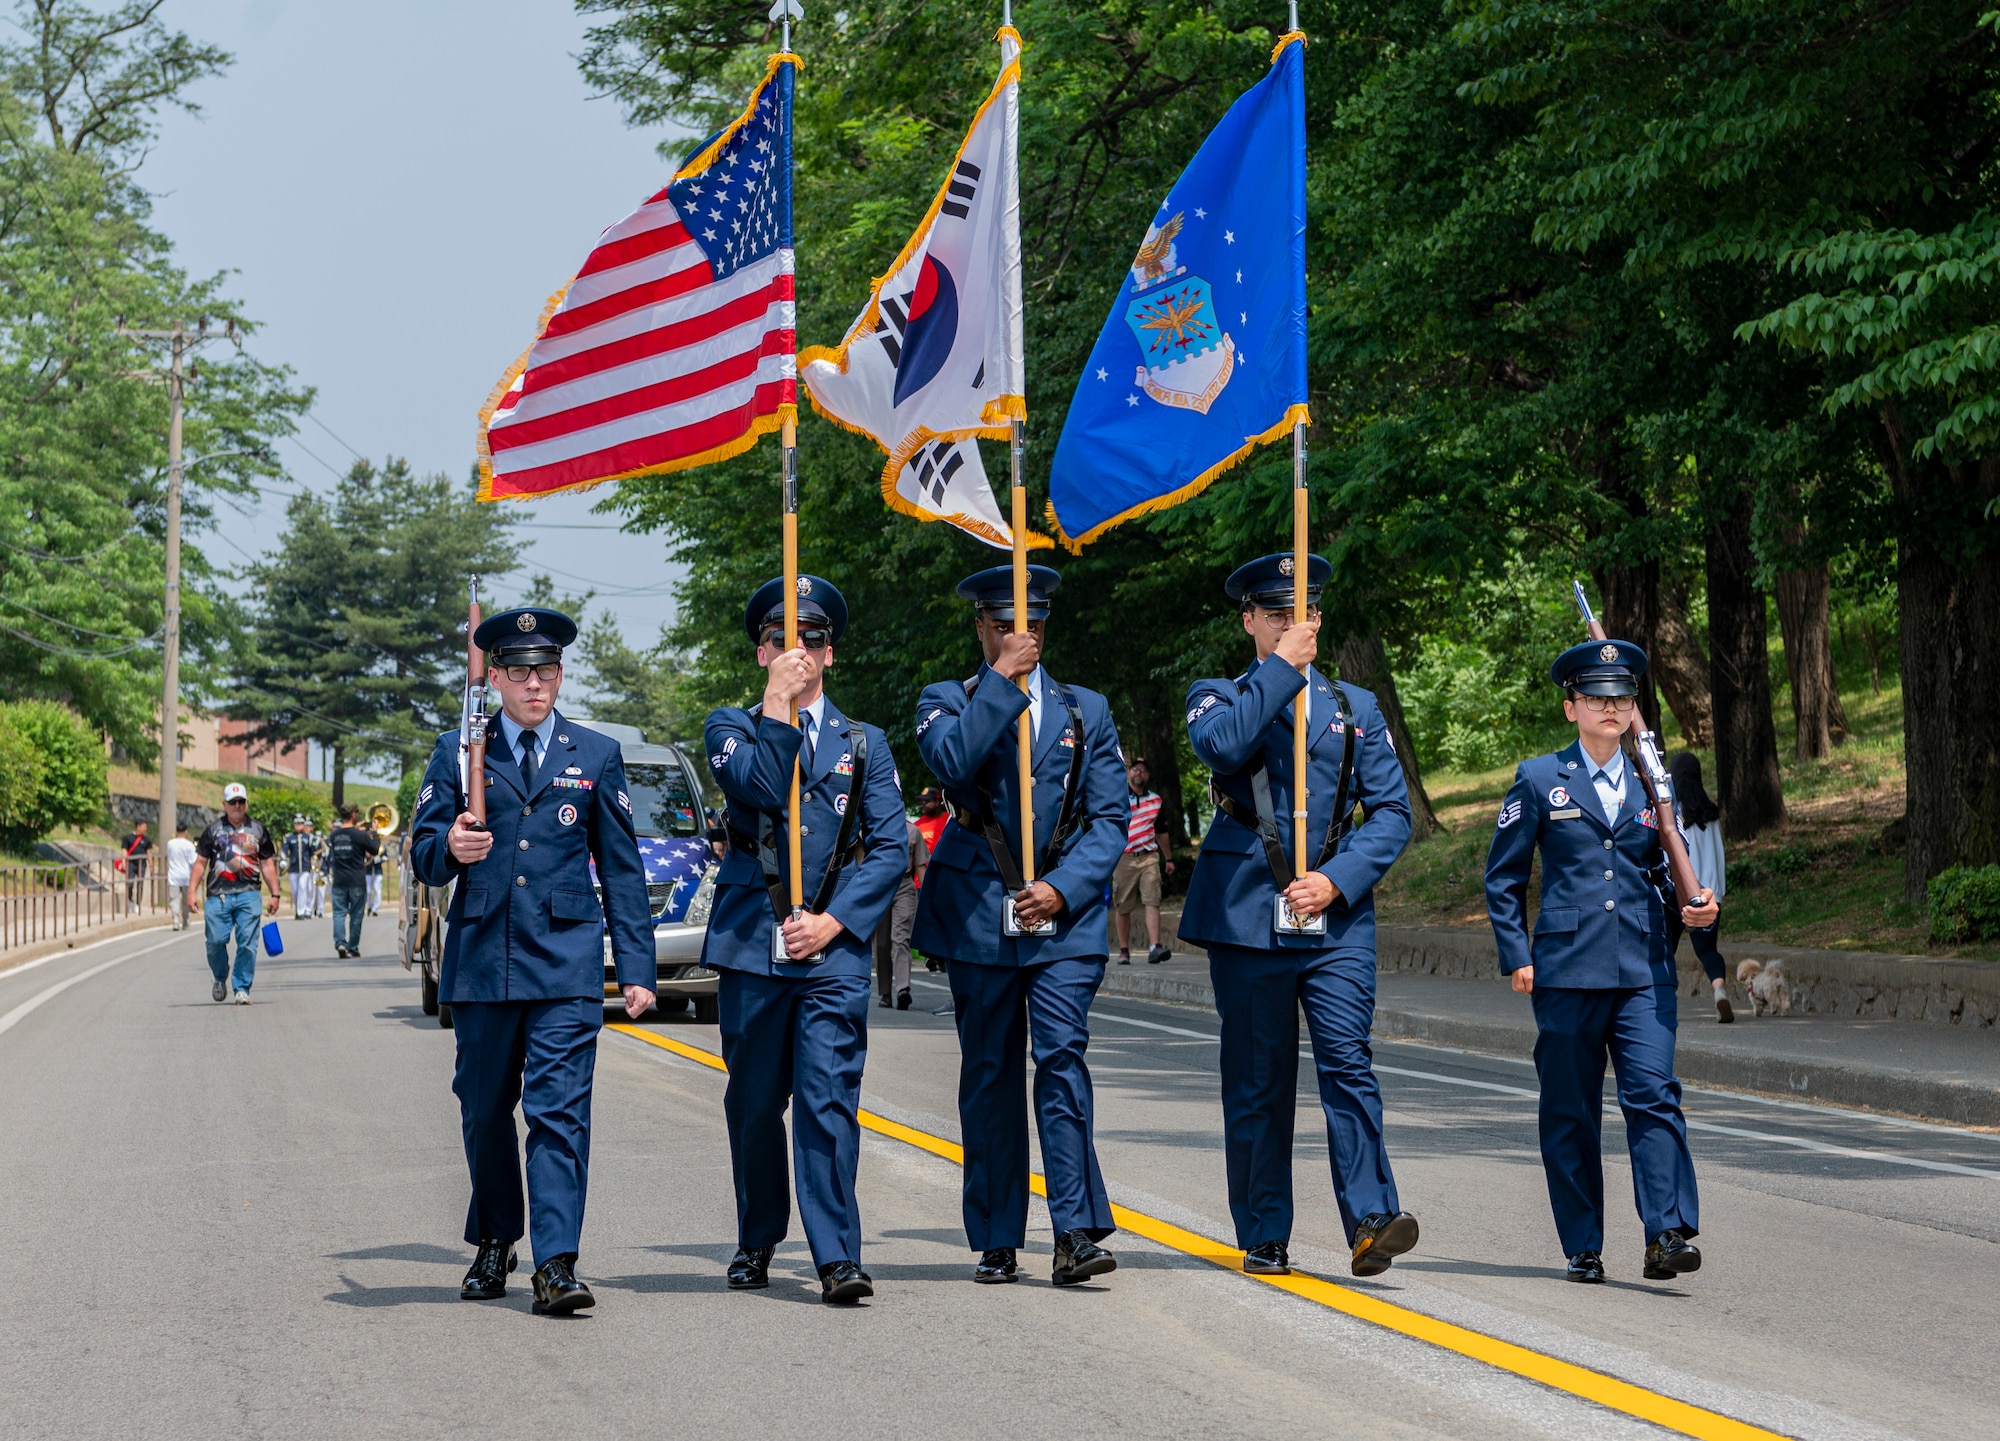 U.S. Air Force Honor Guard members march down a street during the Armed Forces Day Parade .